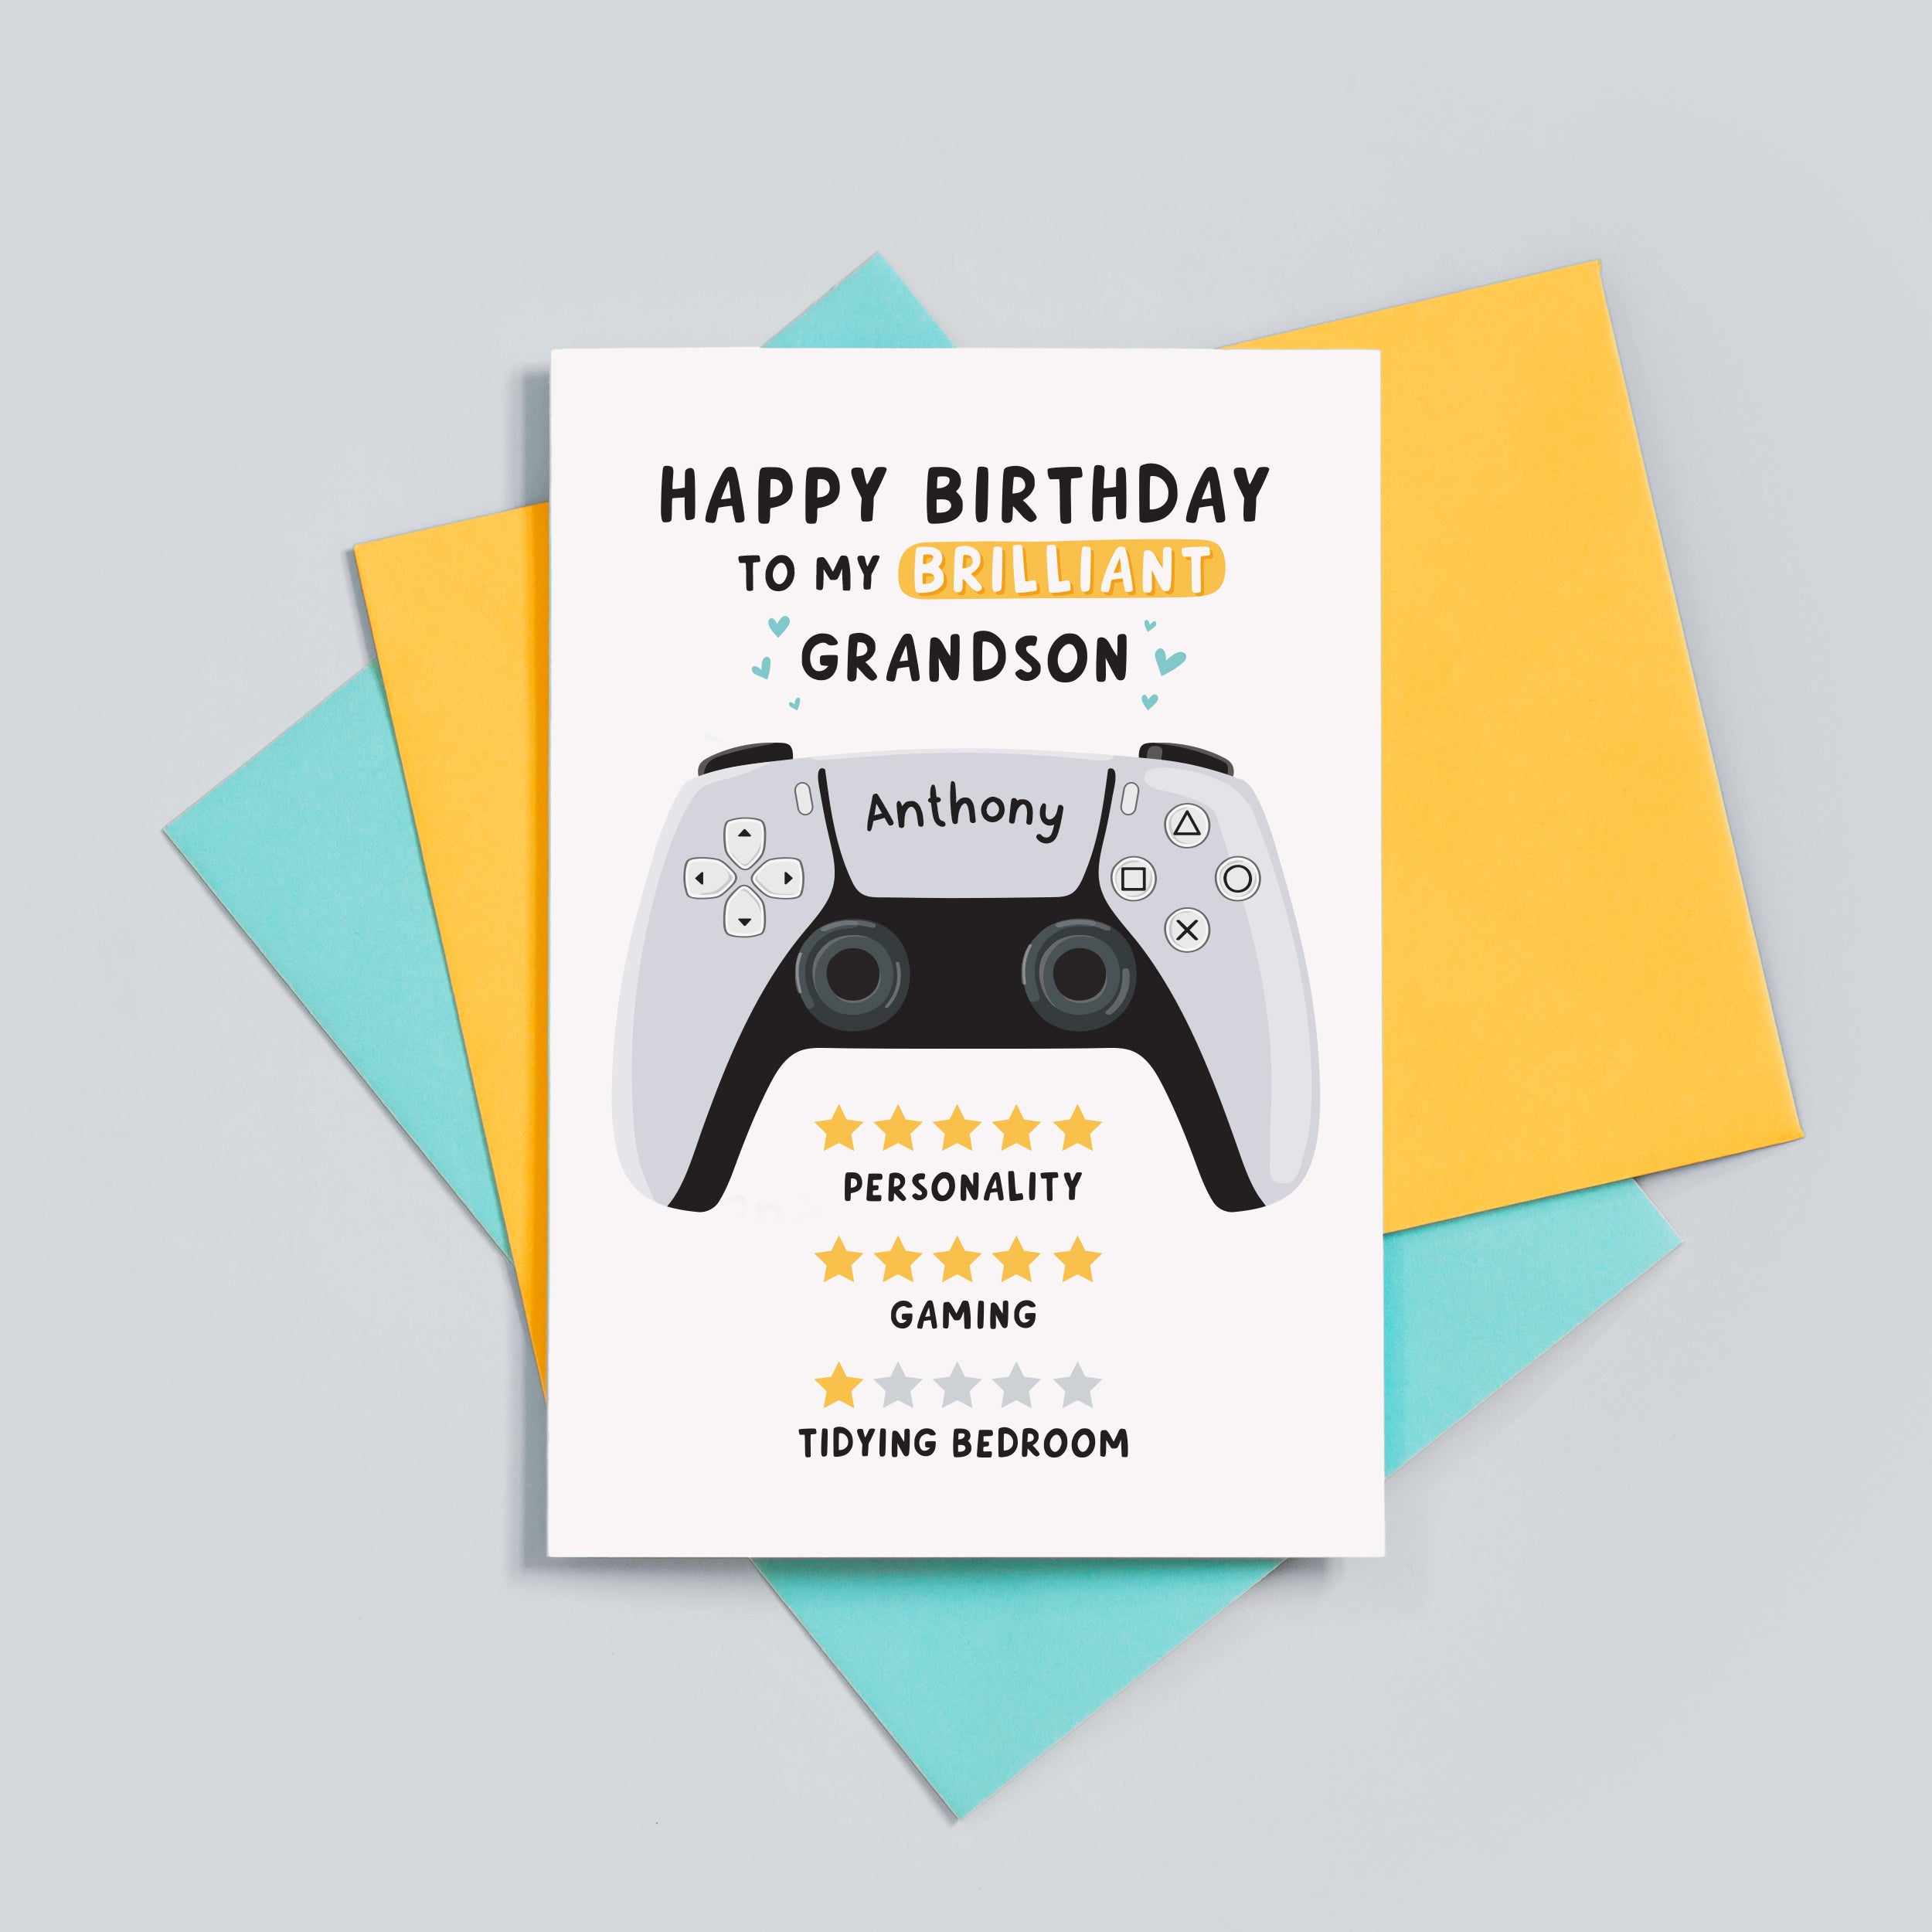 Funny gamer birthday card which reads 'happy birthday to my brilliant Grandson'. 5 stars for personality, 5 stars for gaming and 1 star for tidying bedroom. The card features an illustration of a PS5 controller and can be personalised with a name.